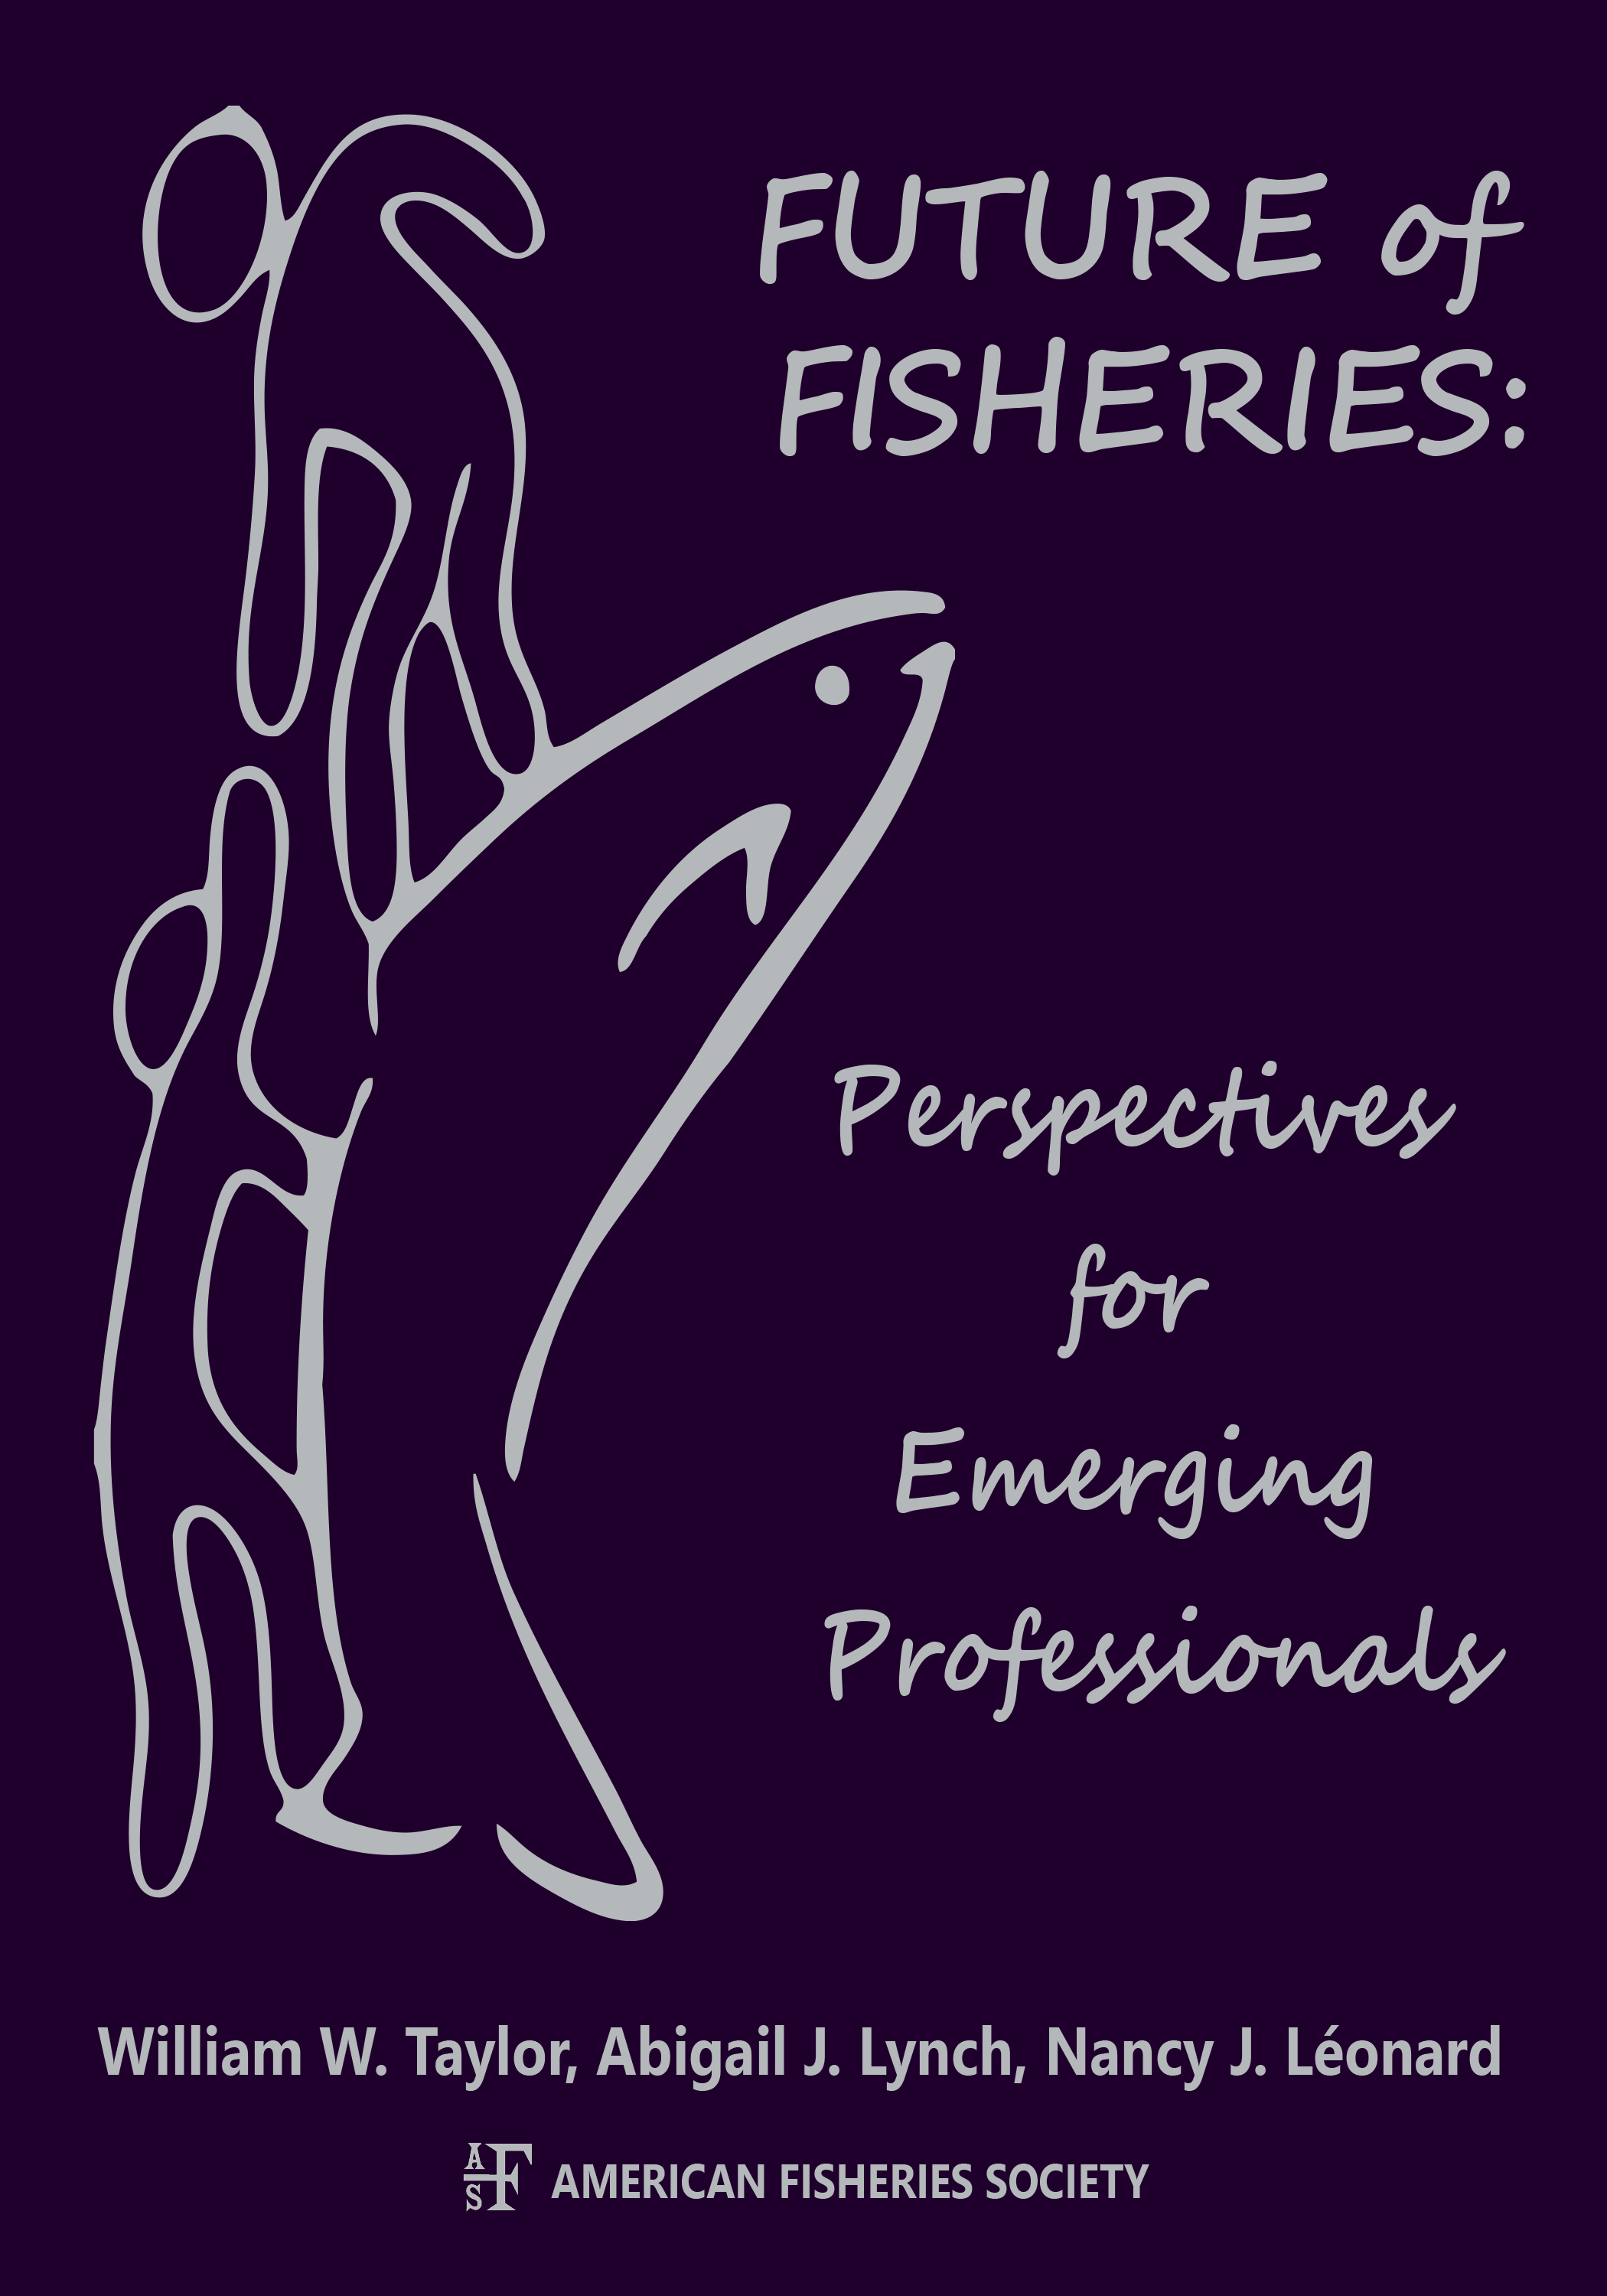 Future of Fisheries book